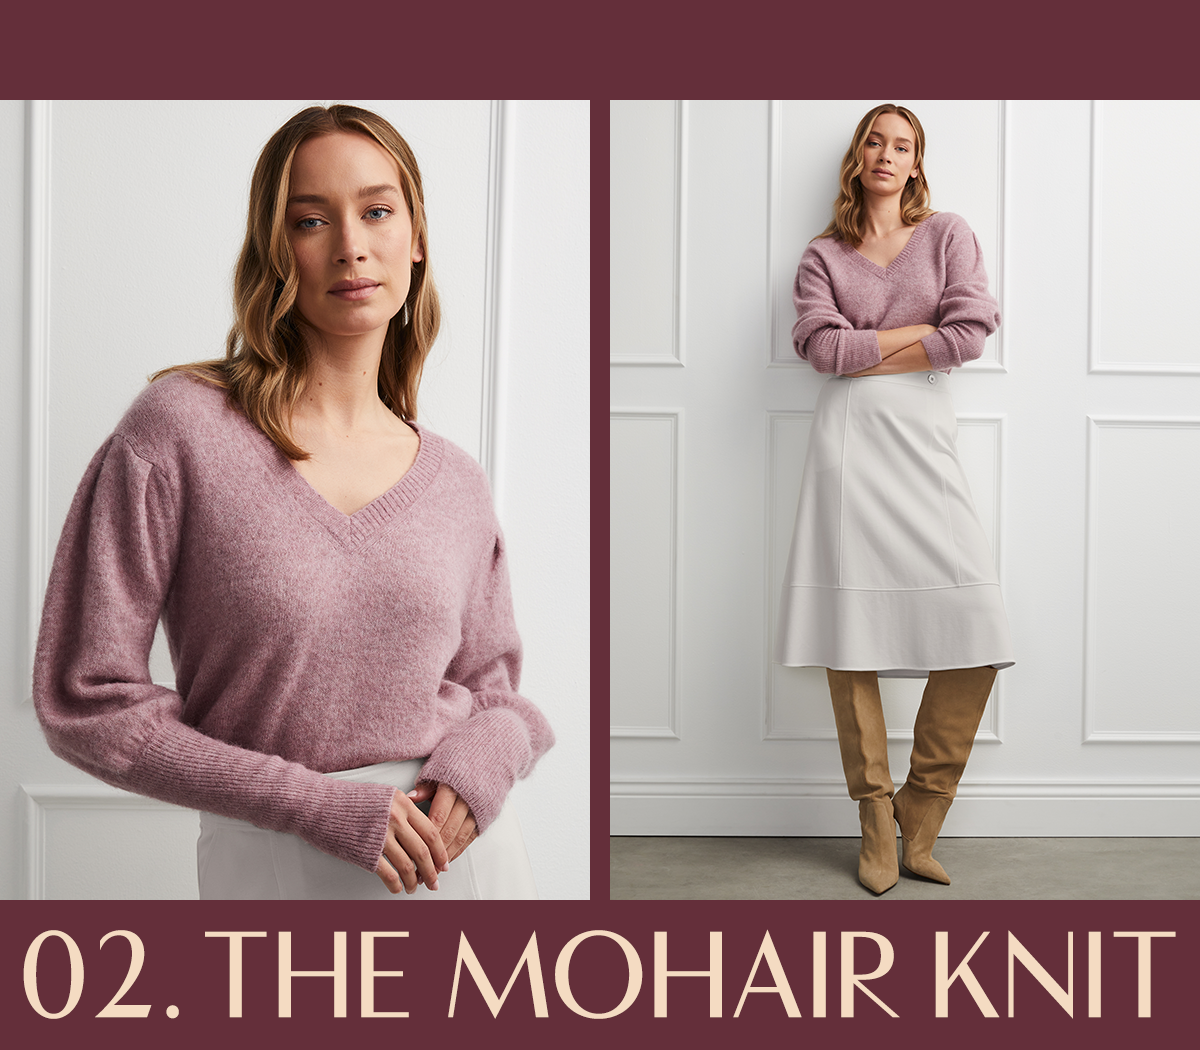 02. THE MOHAIR KNIT